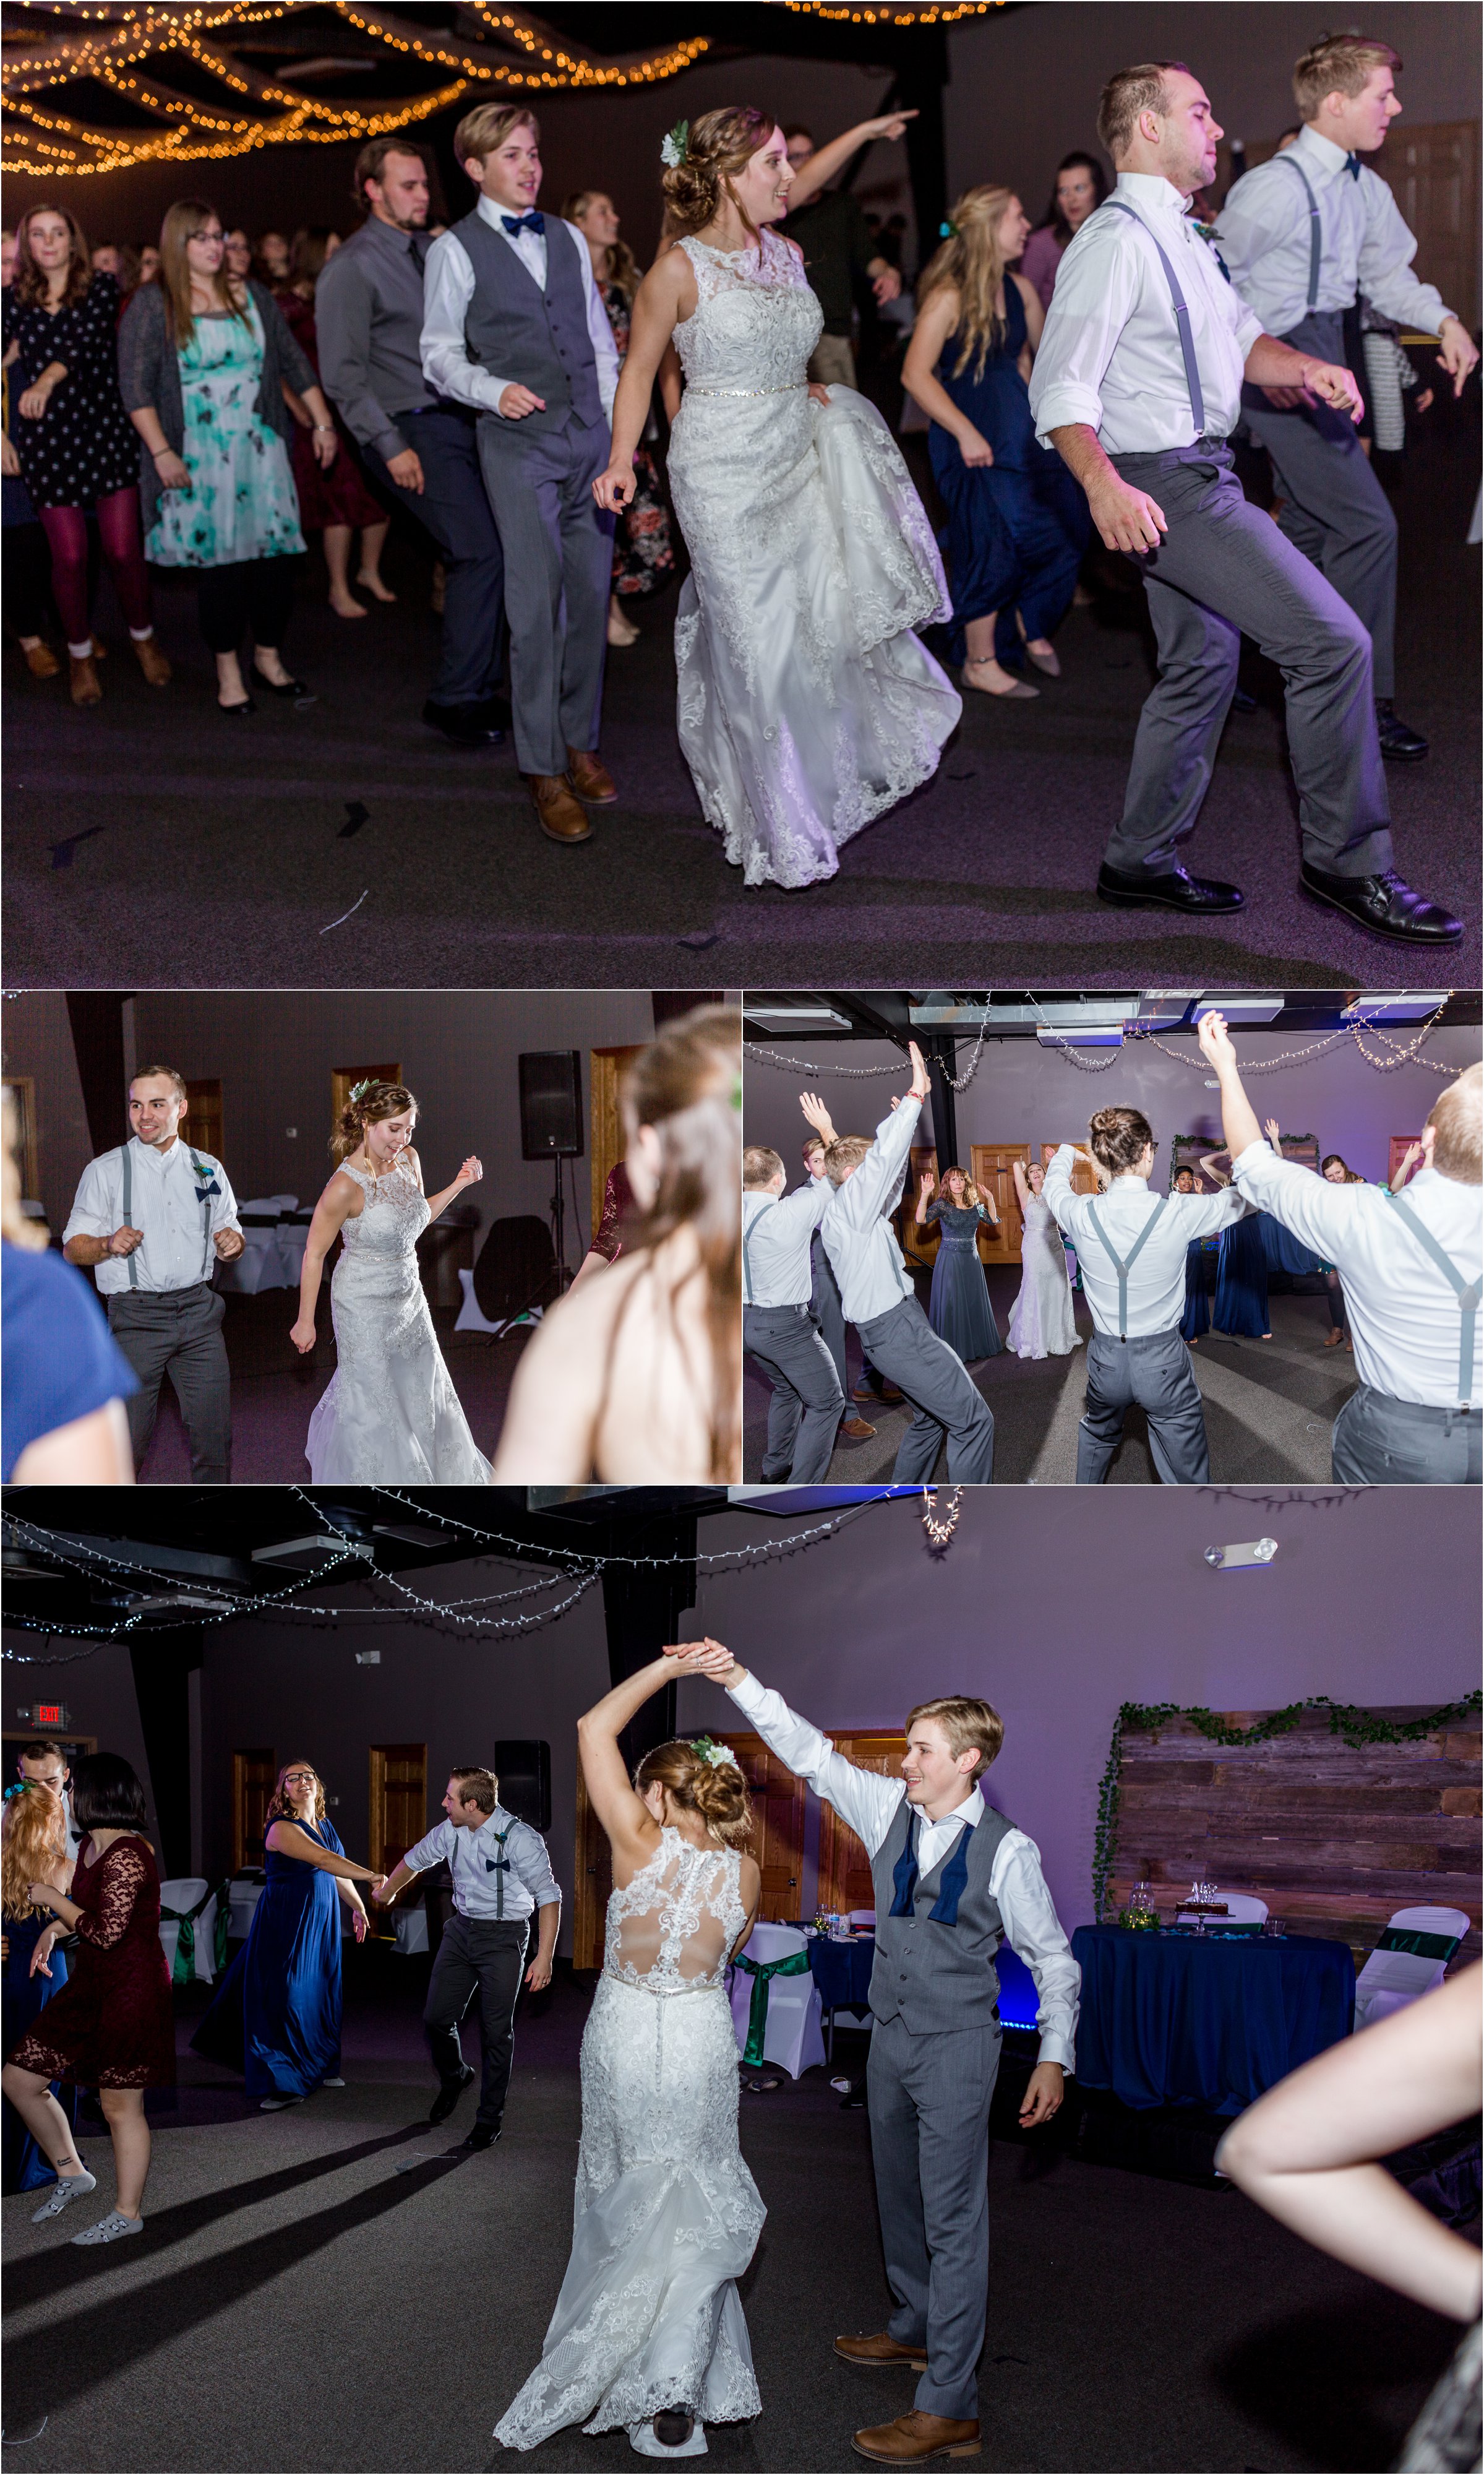 bride and groom dancing with their guests at their wedding reception